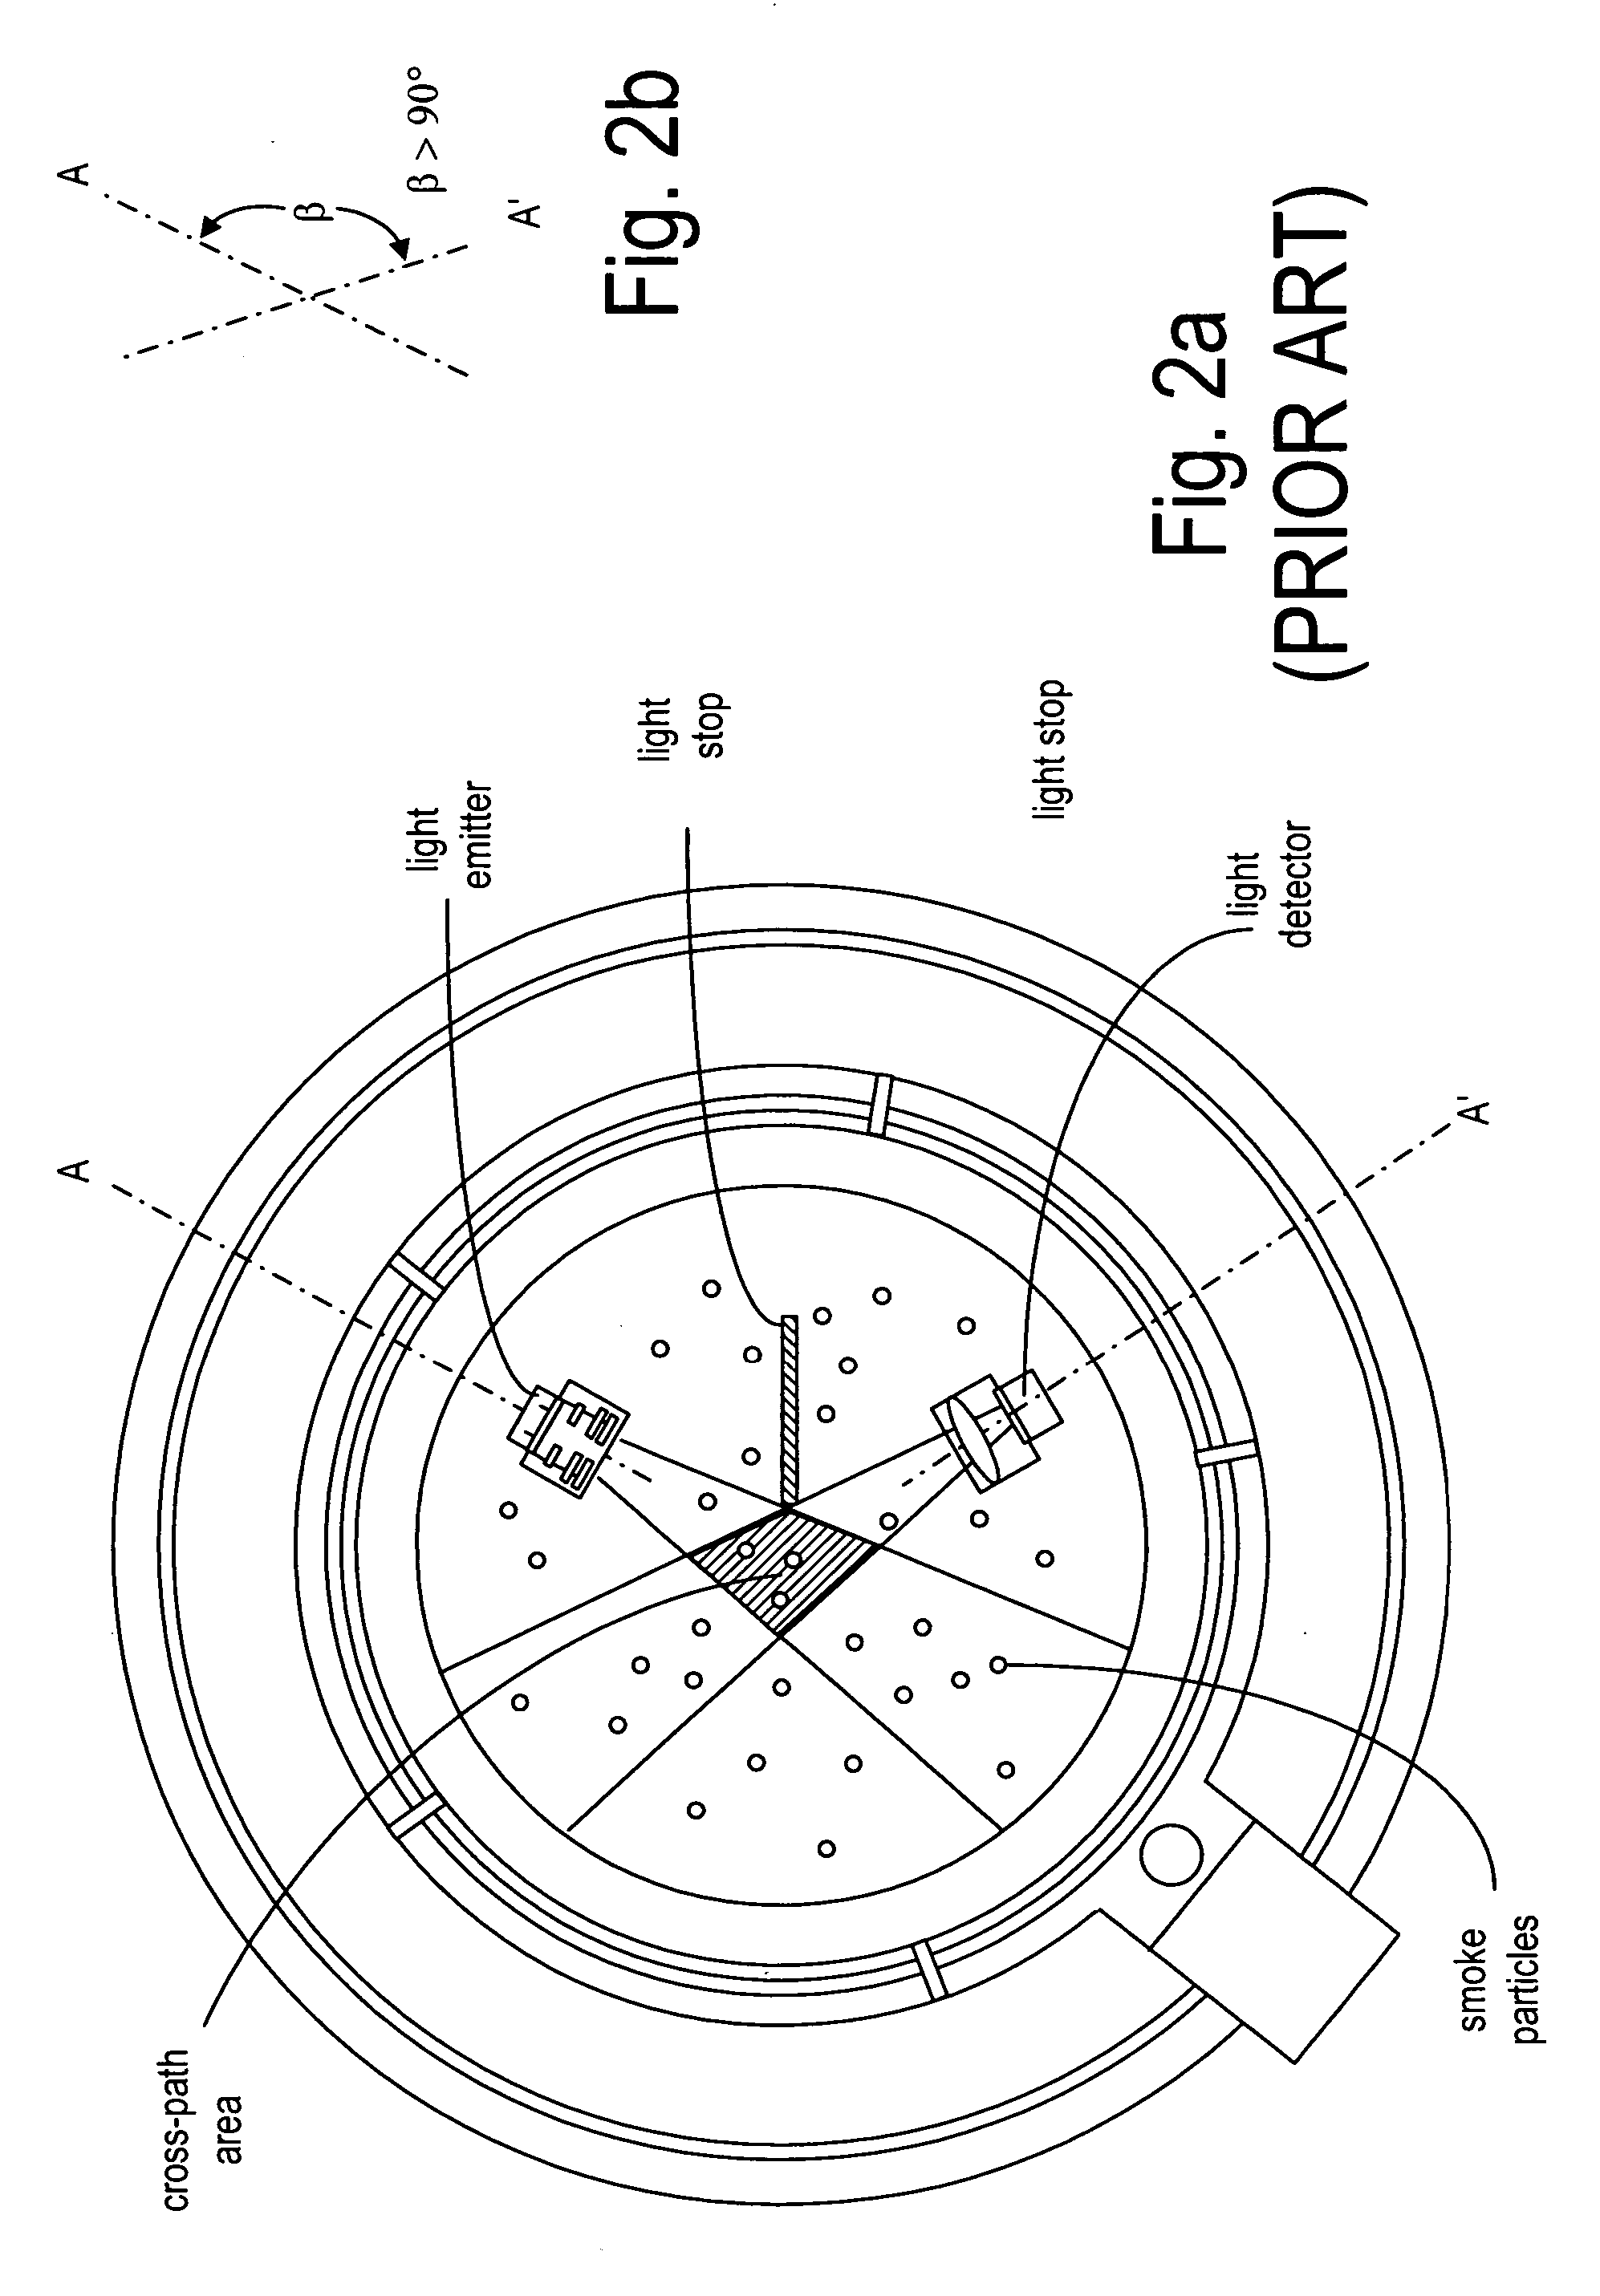 Electronic device having a proximity detector